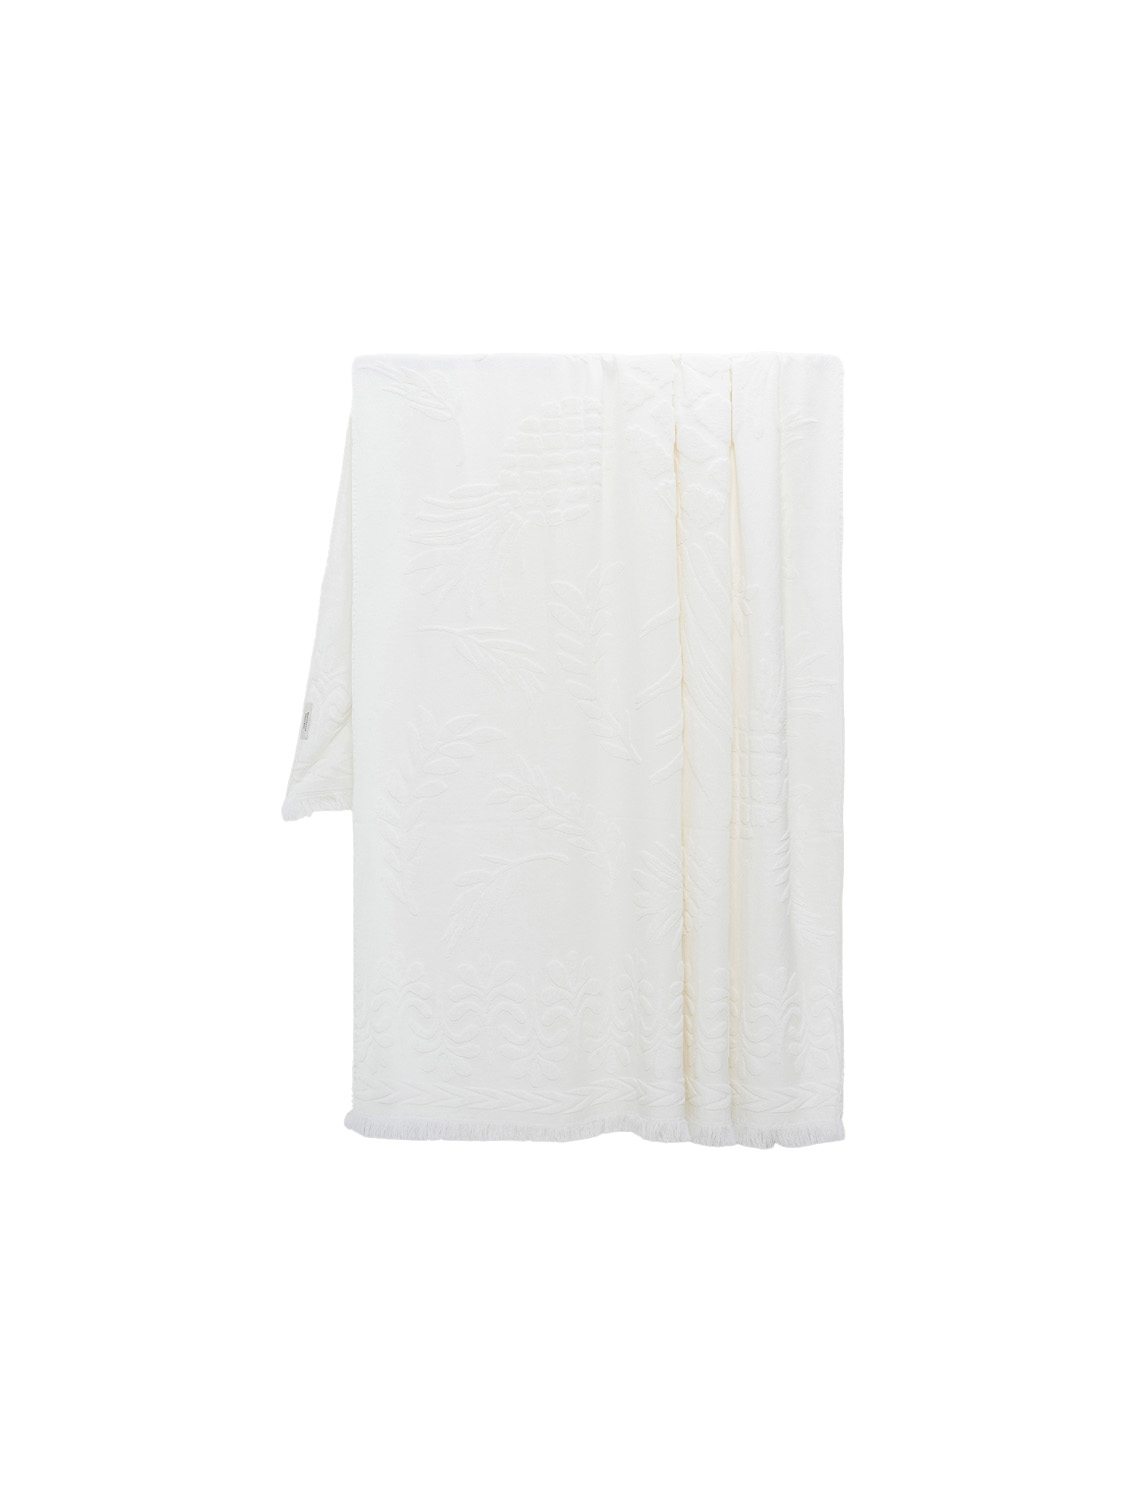 Dorothee Schumacher Cozy – blanket with embroidery  white One Size